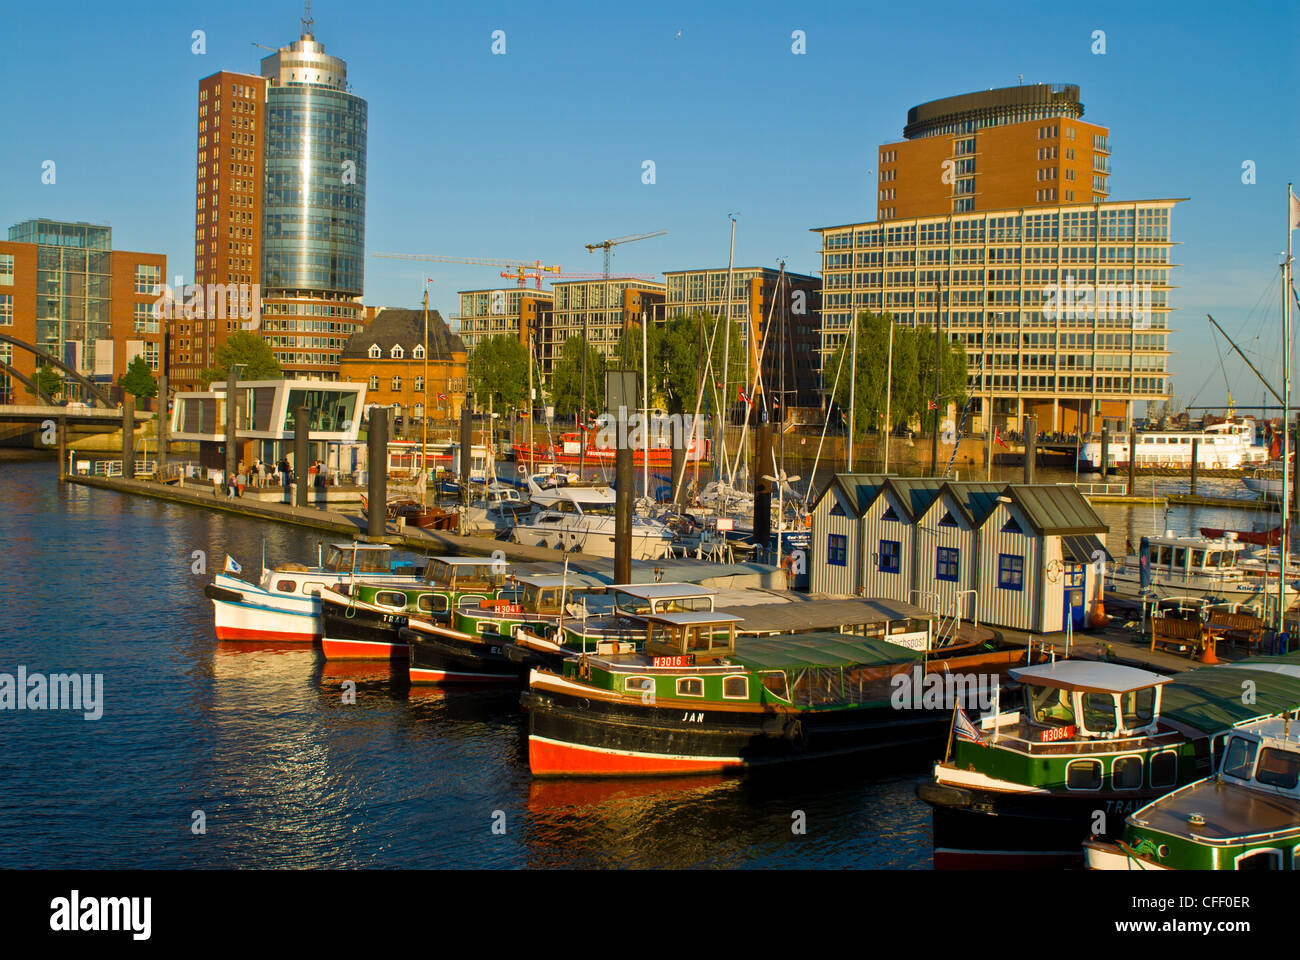 Little boats in the habour in front of the Hamburg Speicherstadt, Hamburg, Germany, Europe Stock Photo